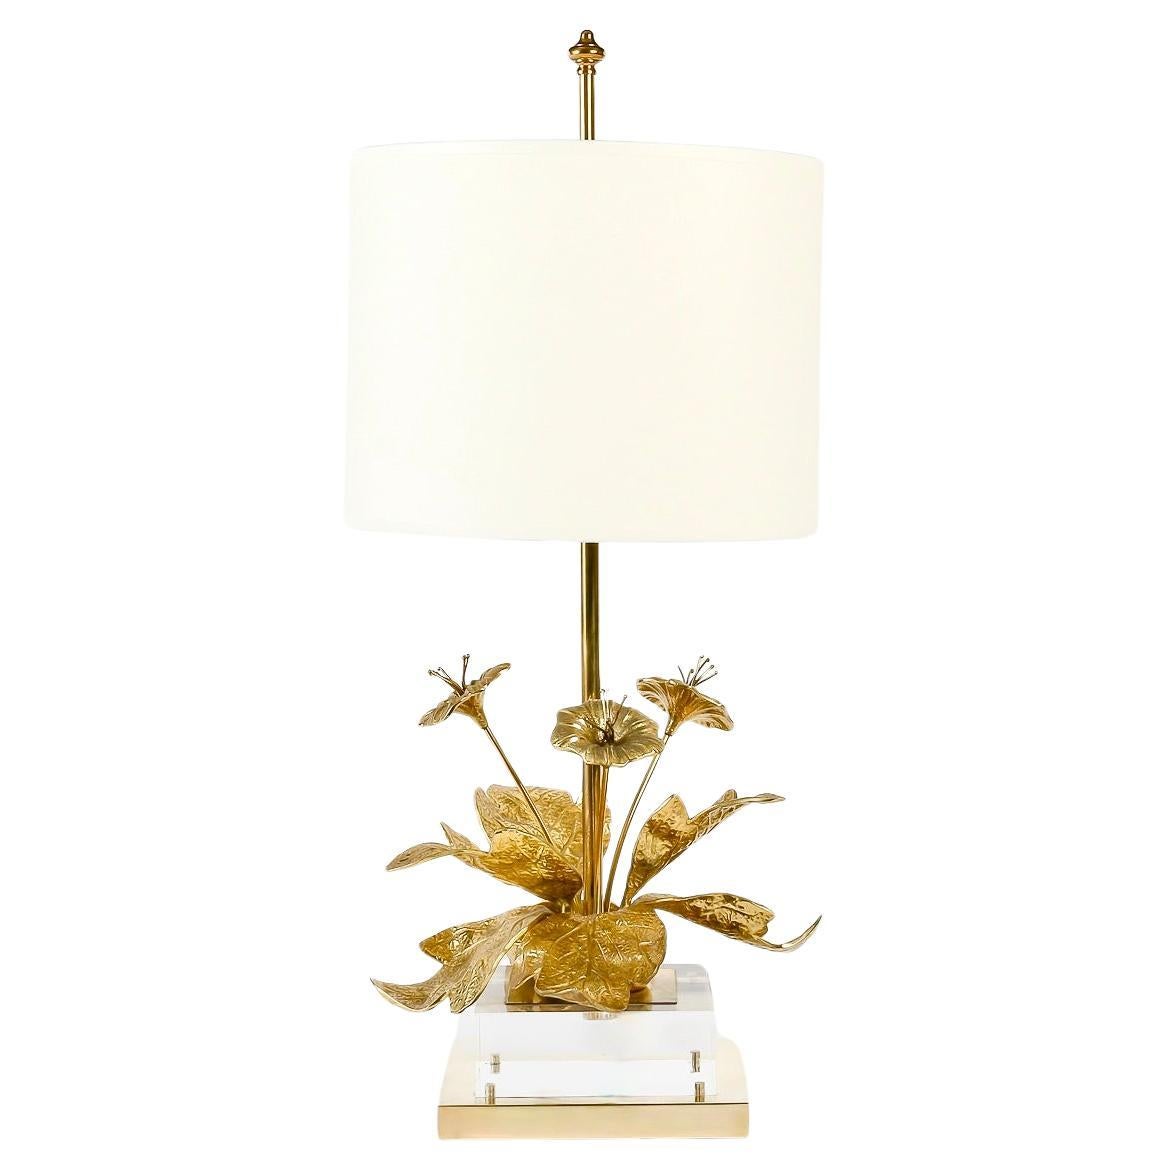 Comprising a square gilded-brass base on which rests a Plexiglas cube, above which is a smaller gilded-brass plate, the lamp is decorated just above with a pretty bouquet of gilded-bronze flowers and foliage scattered around the lamp's perimeter.
In